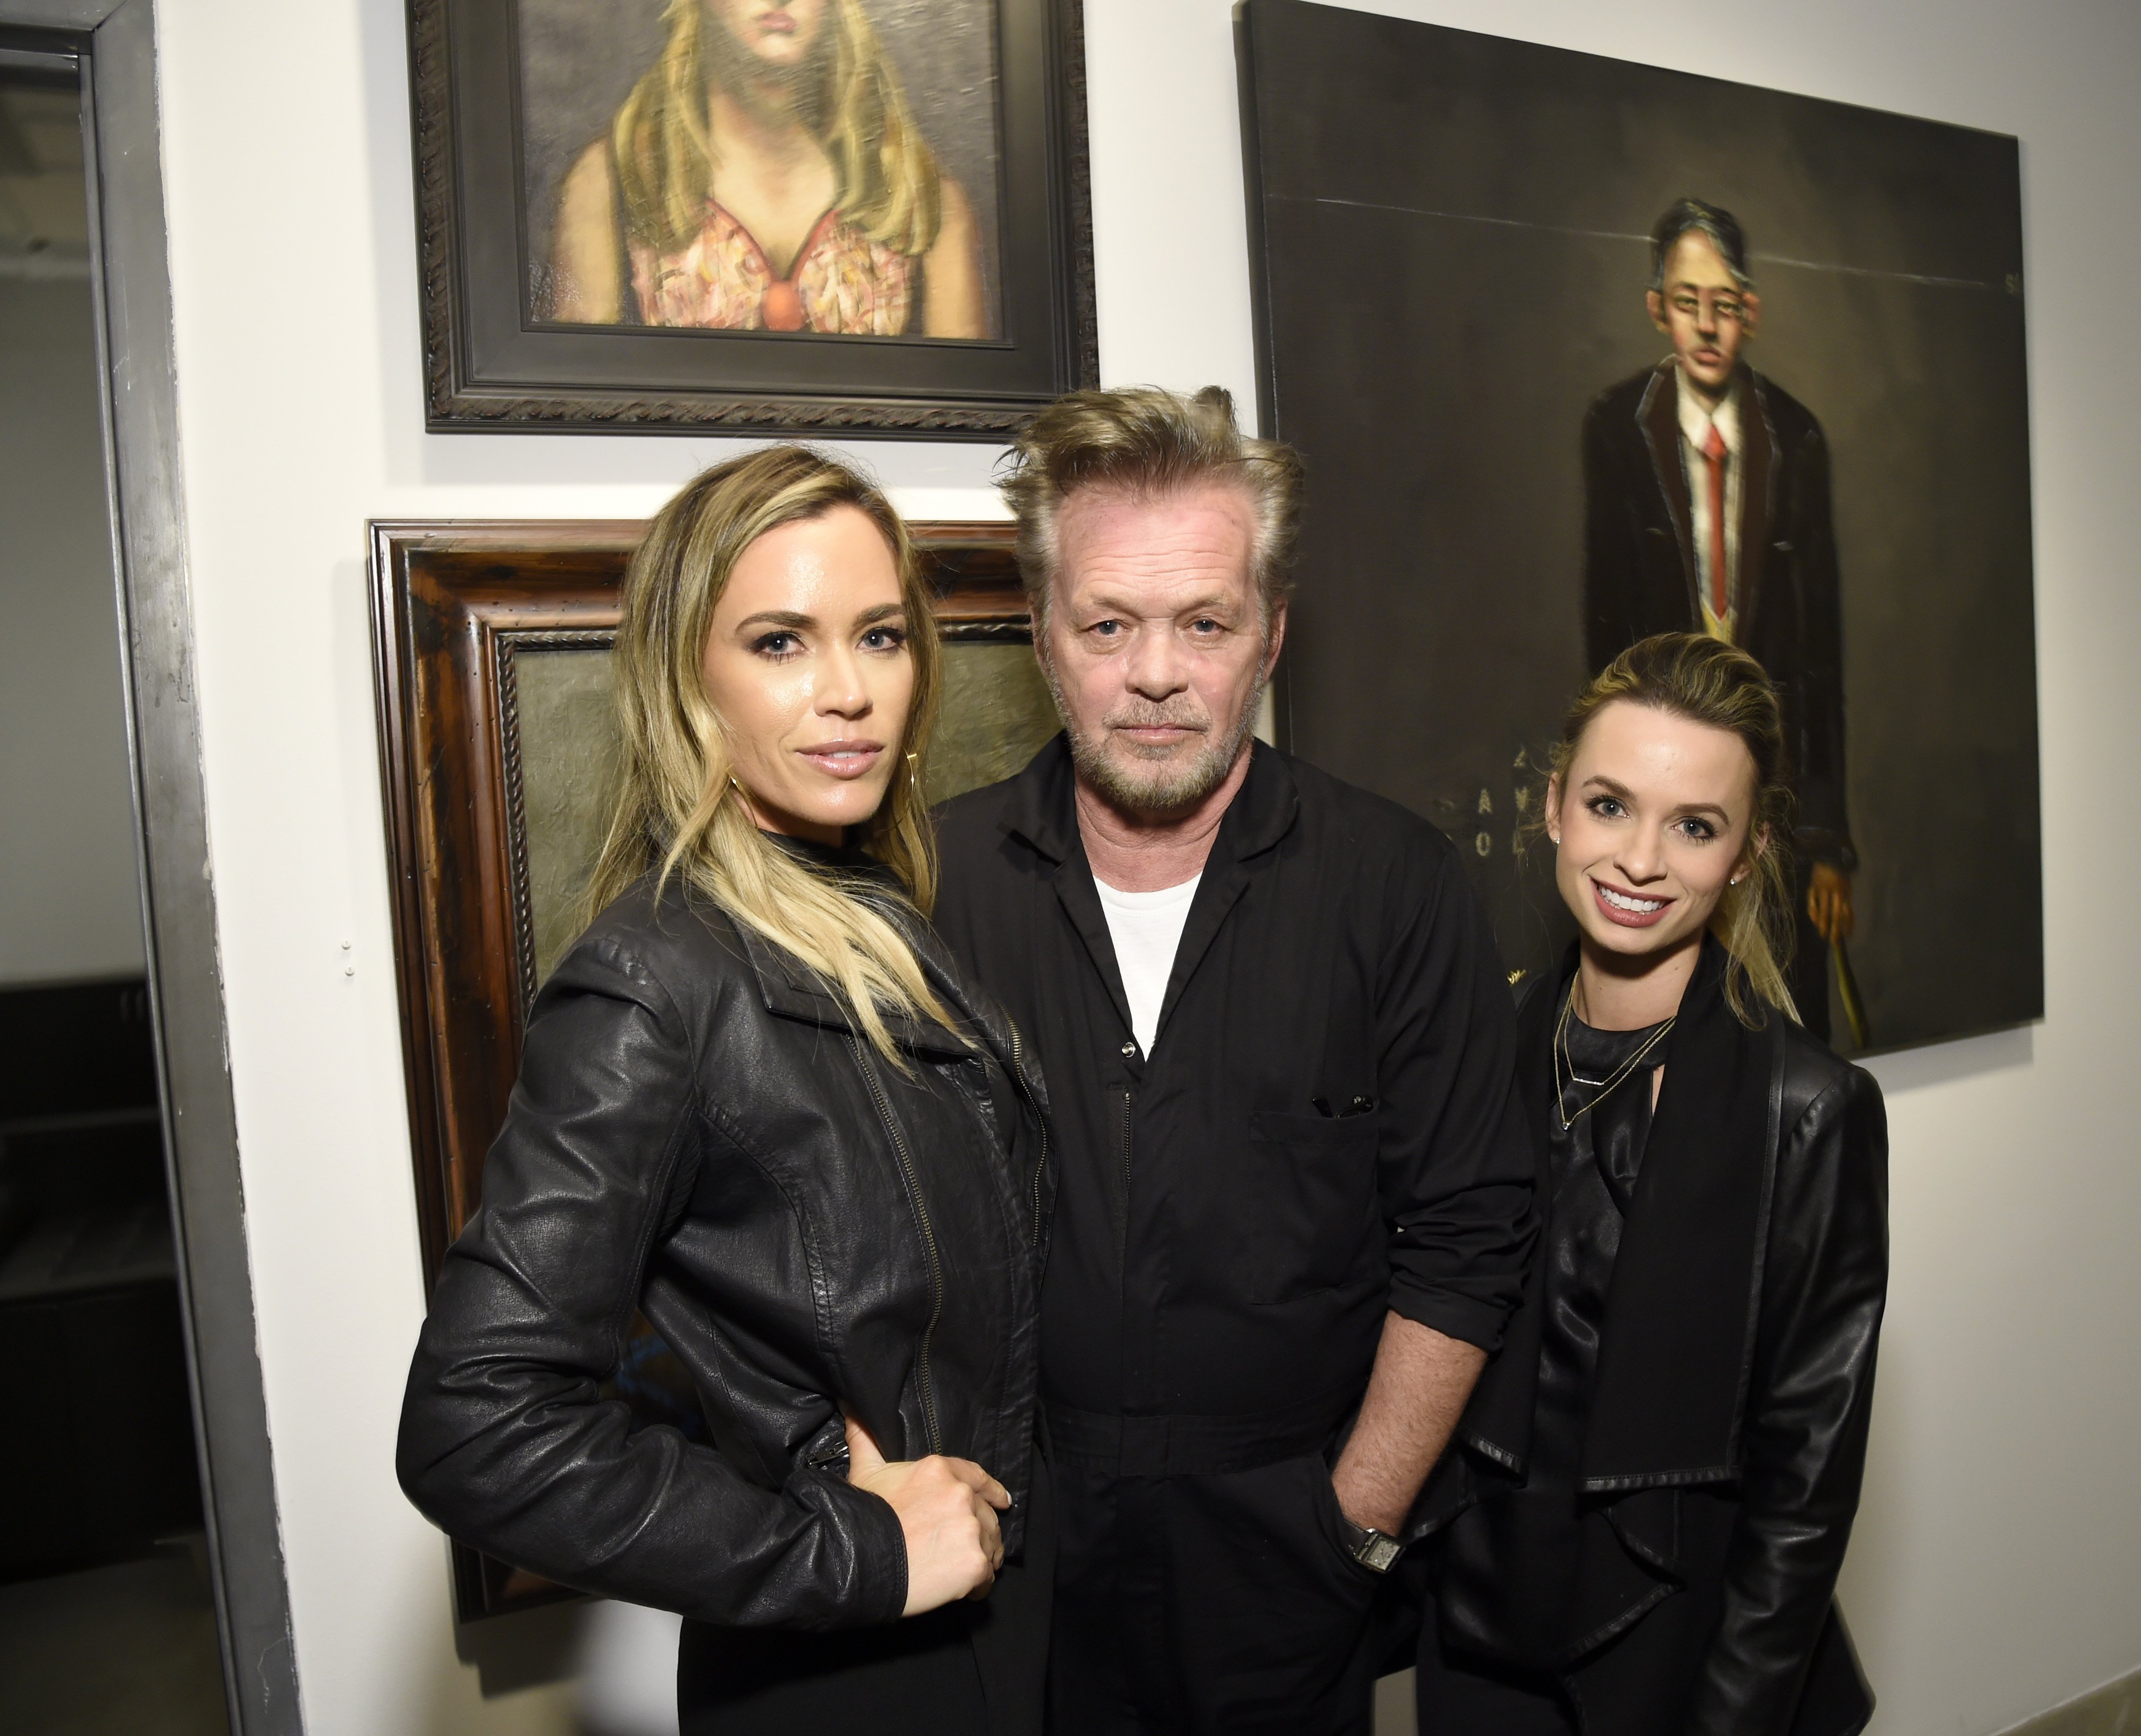 ‘RHOBH’: Teddi Mellencamp’s Dad John Mellencamp Says He ‘Never Liked’ That She Was on the Bravo Show